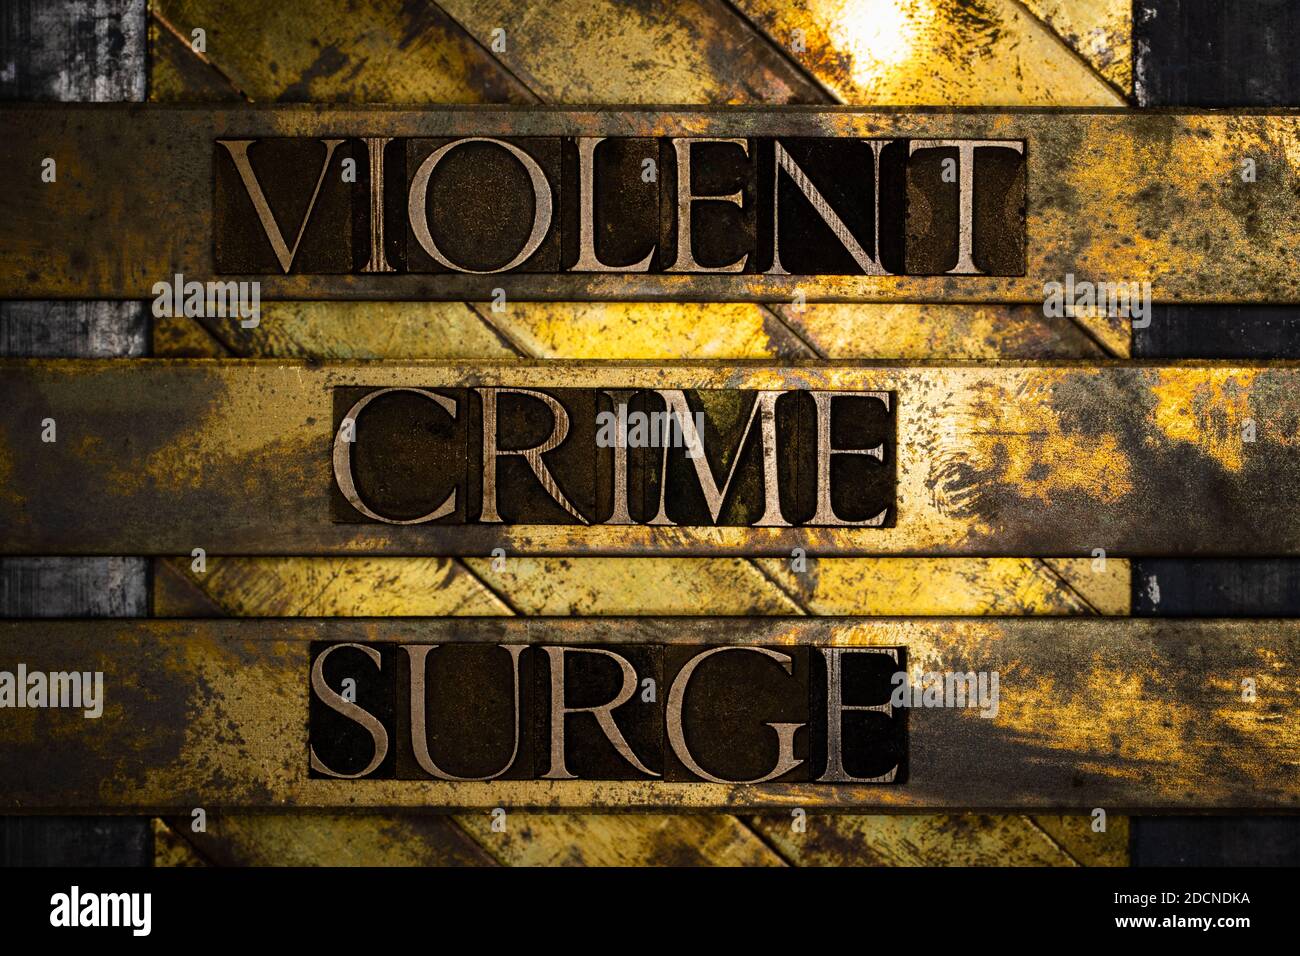 Violent Crime Surge text formed by real authentic typeset letters on vintage textured grunge bronze background Stock Photo